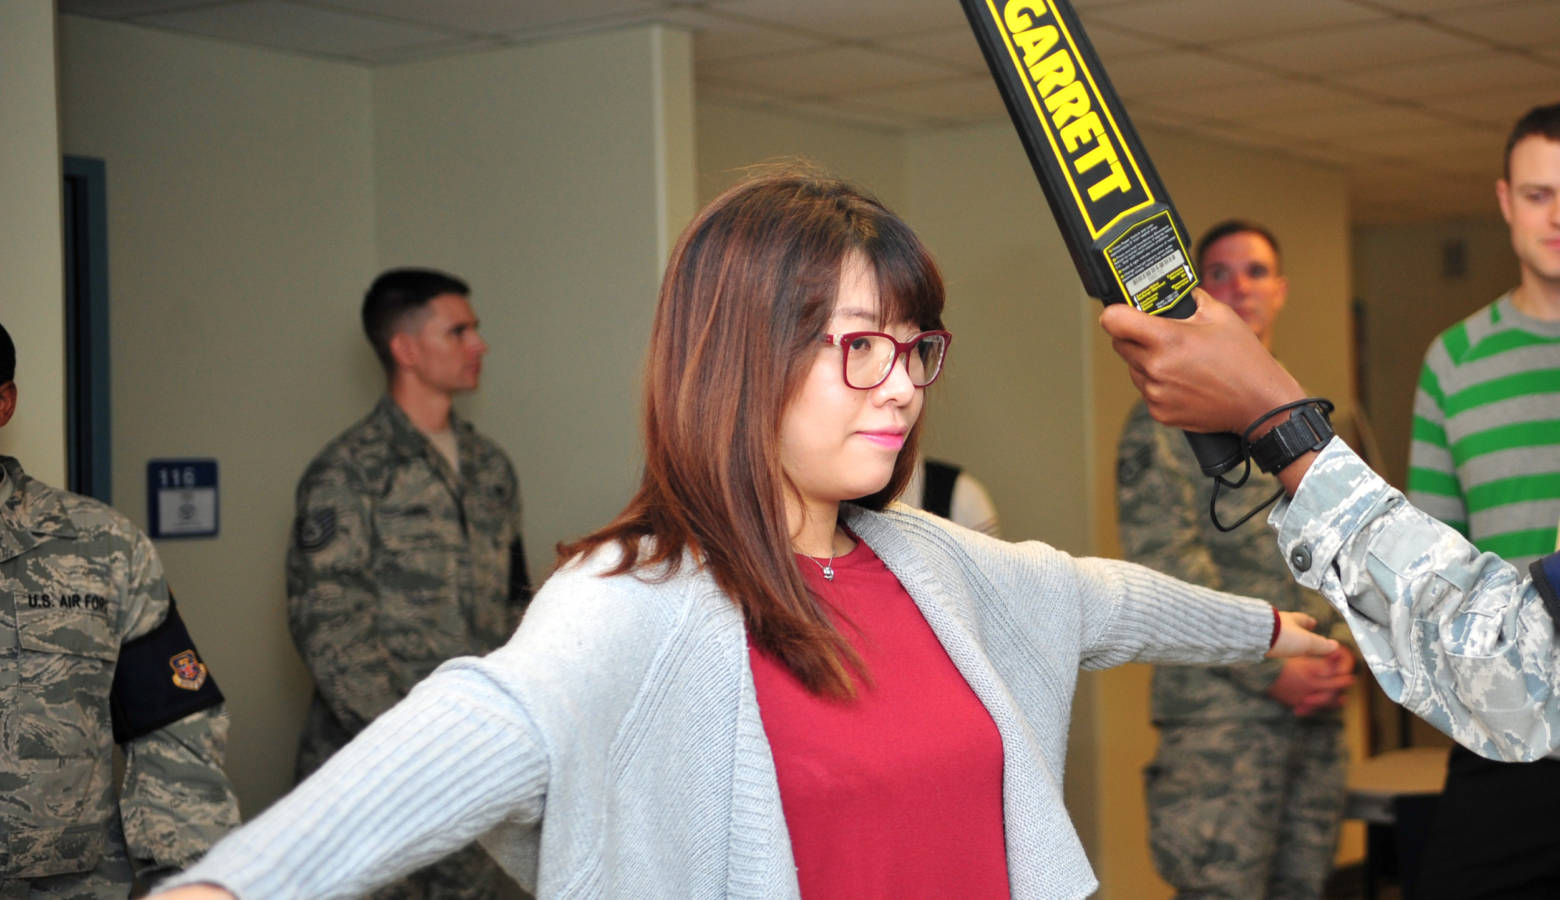 The state is offering handheld metal detectors to any school that requests them. (U.S. Air Force)